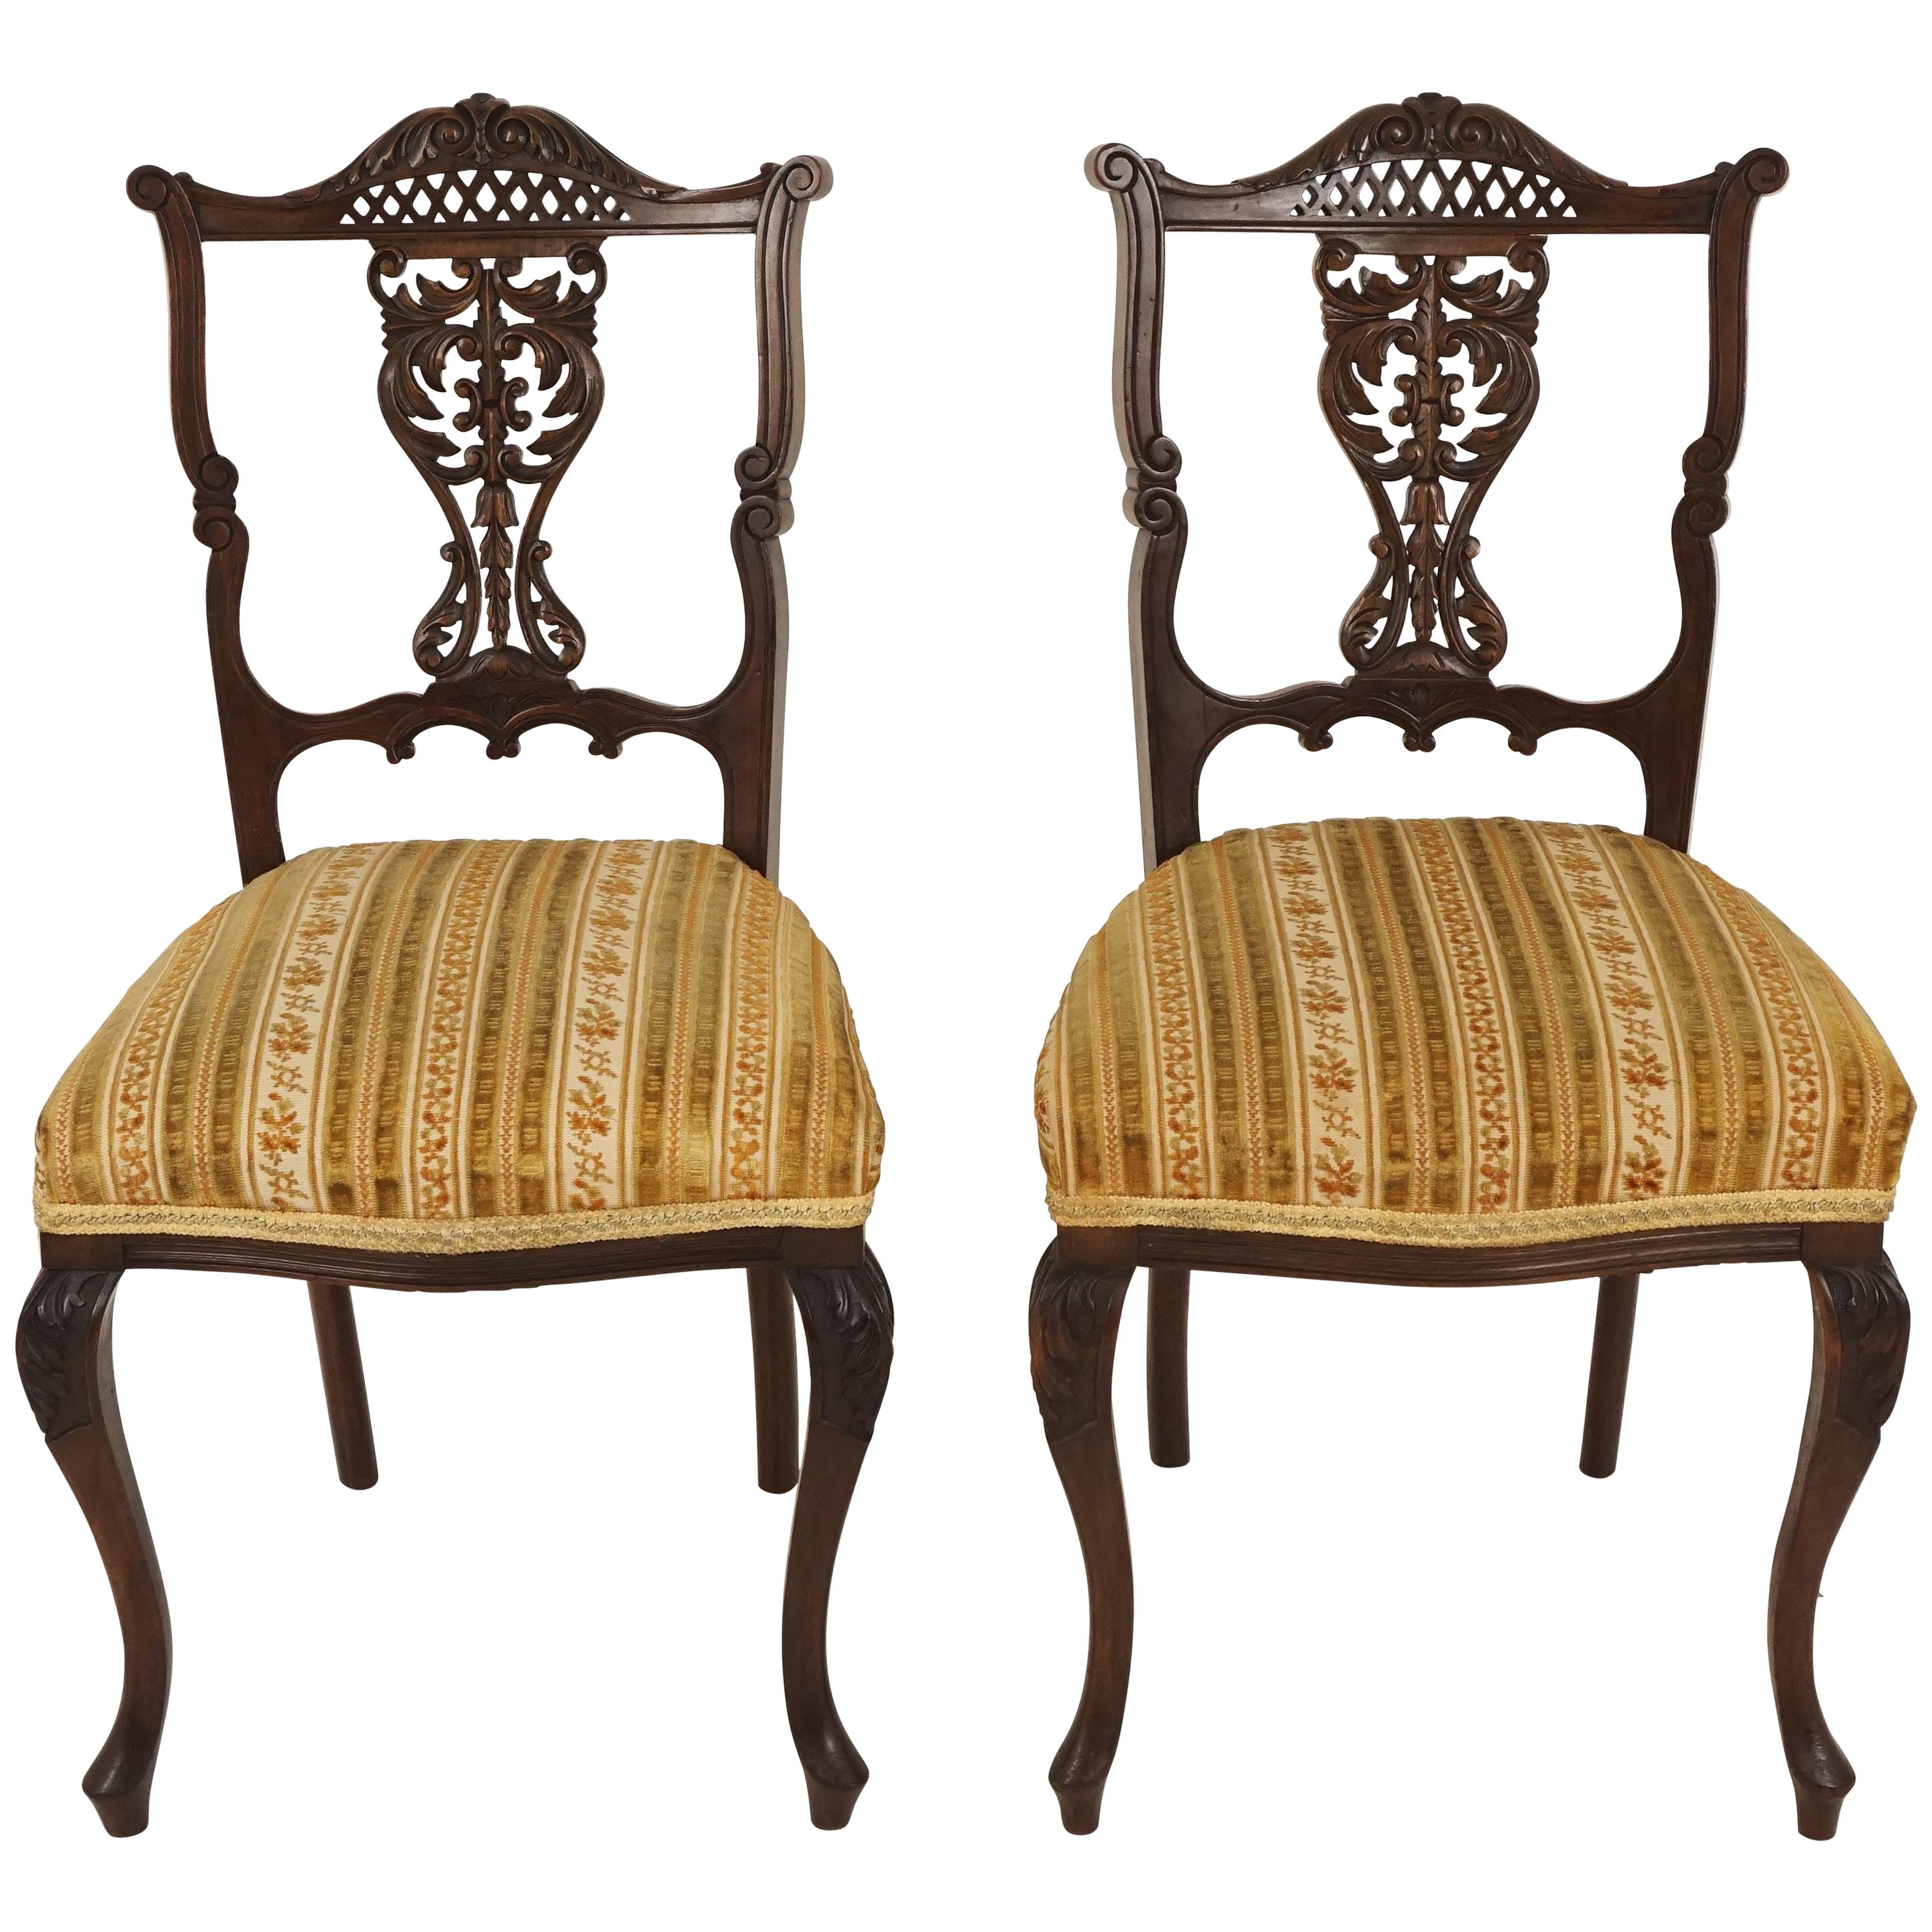 Antique Pair of Upholstered Walnut Parlour or Side Chairs Scotland, 1900